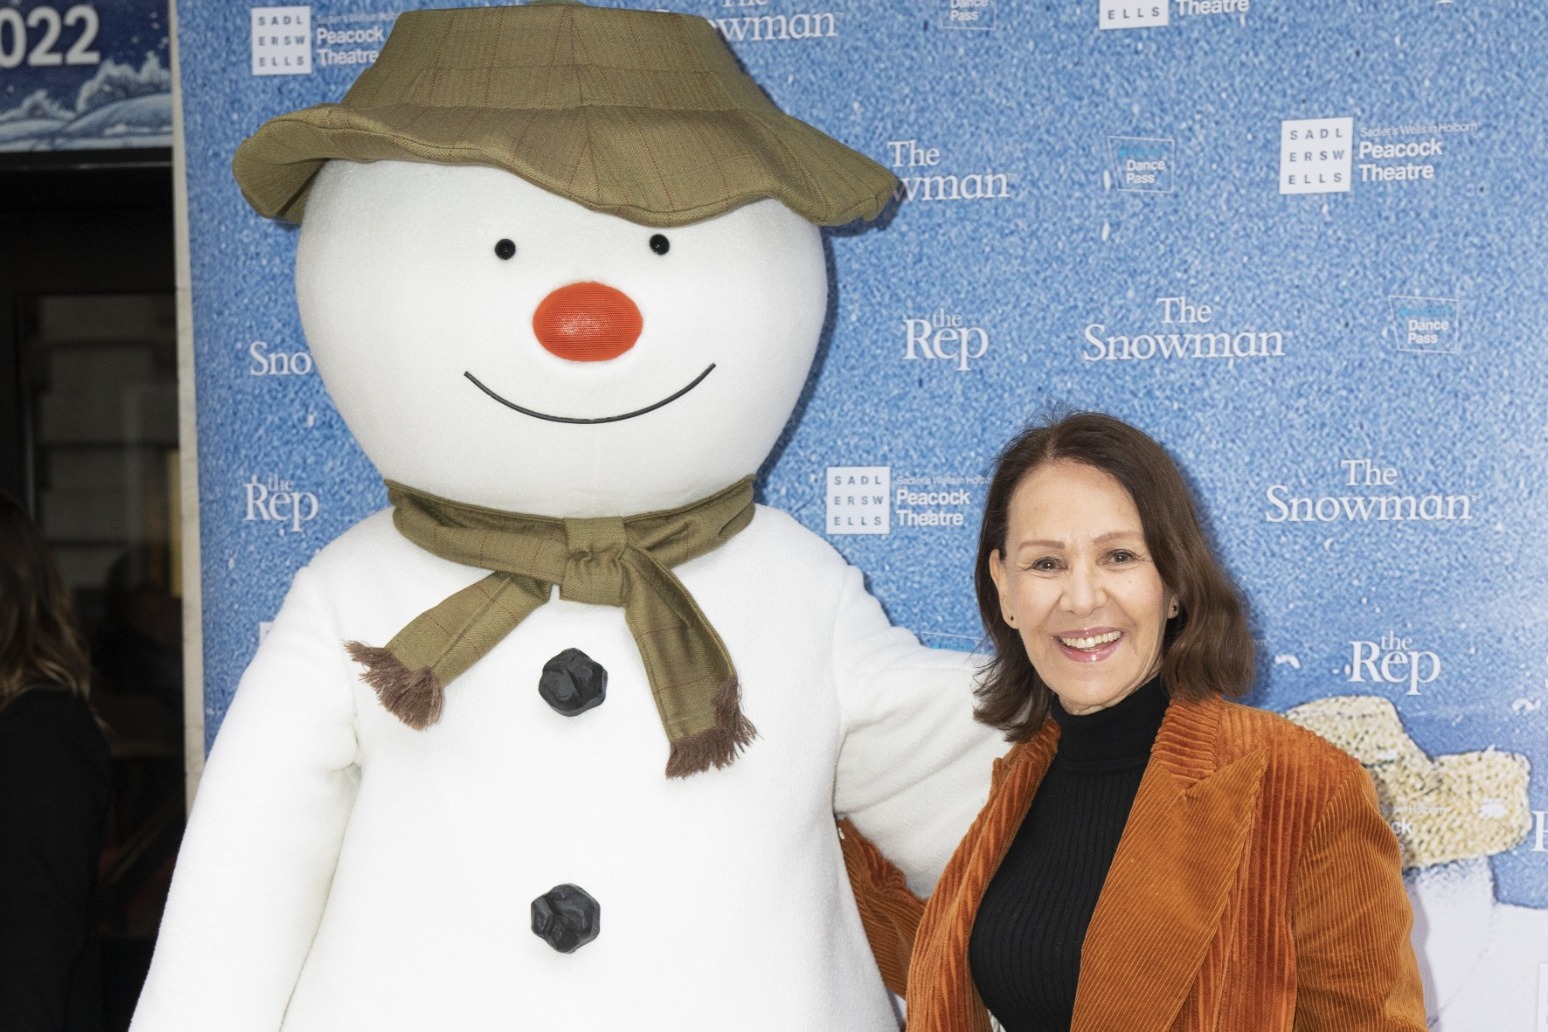 Arlene Philips among stars celebrating 25th year of The Snowman stage show 